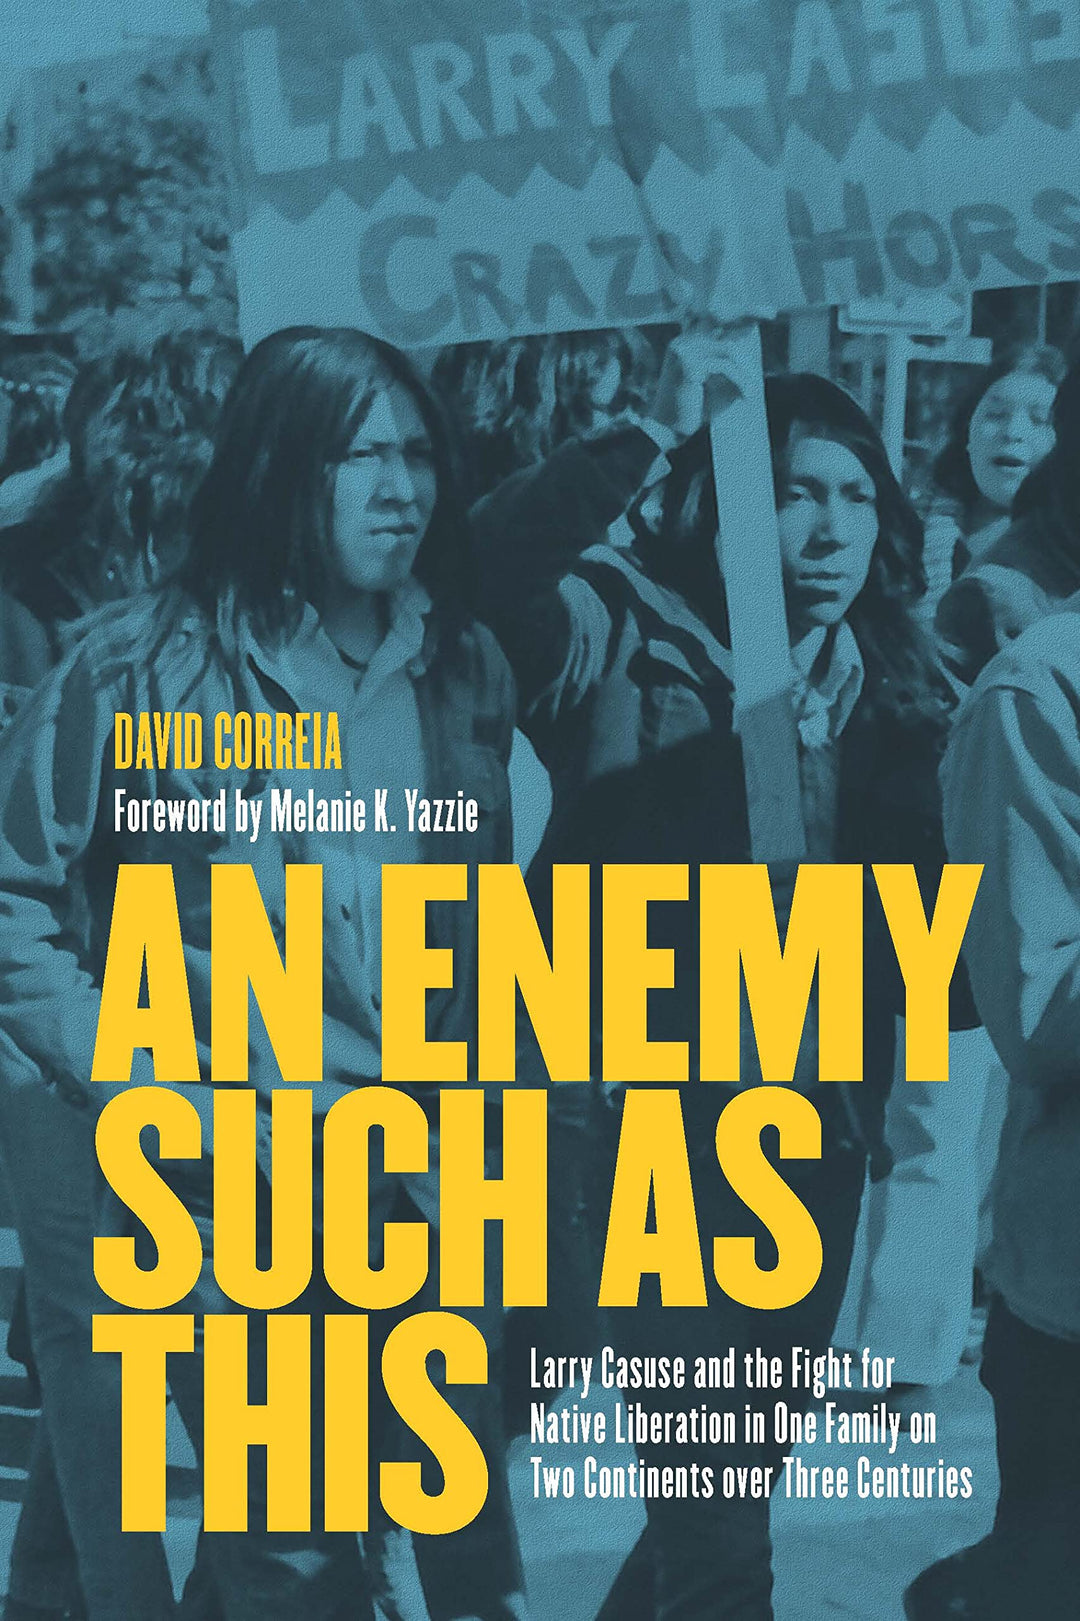 An Enemy Such as This: Larry Casuse and the Fight for Native Liberation in One Family on Two Continents Over Three Centuries by David Correia